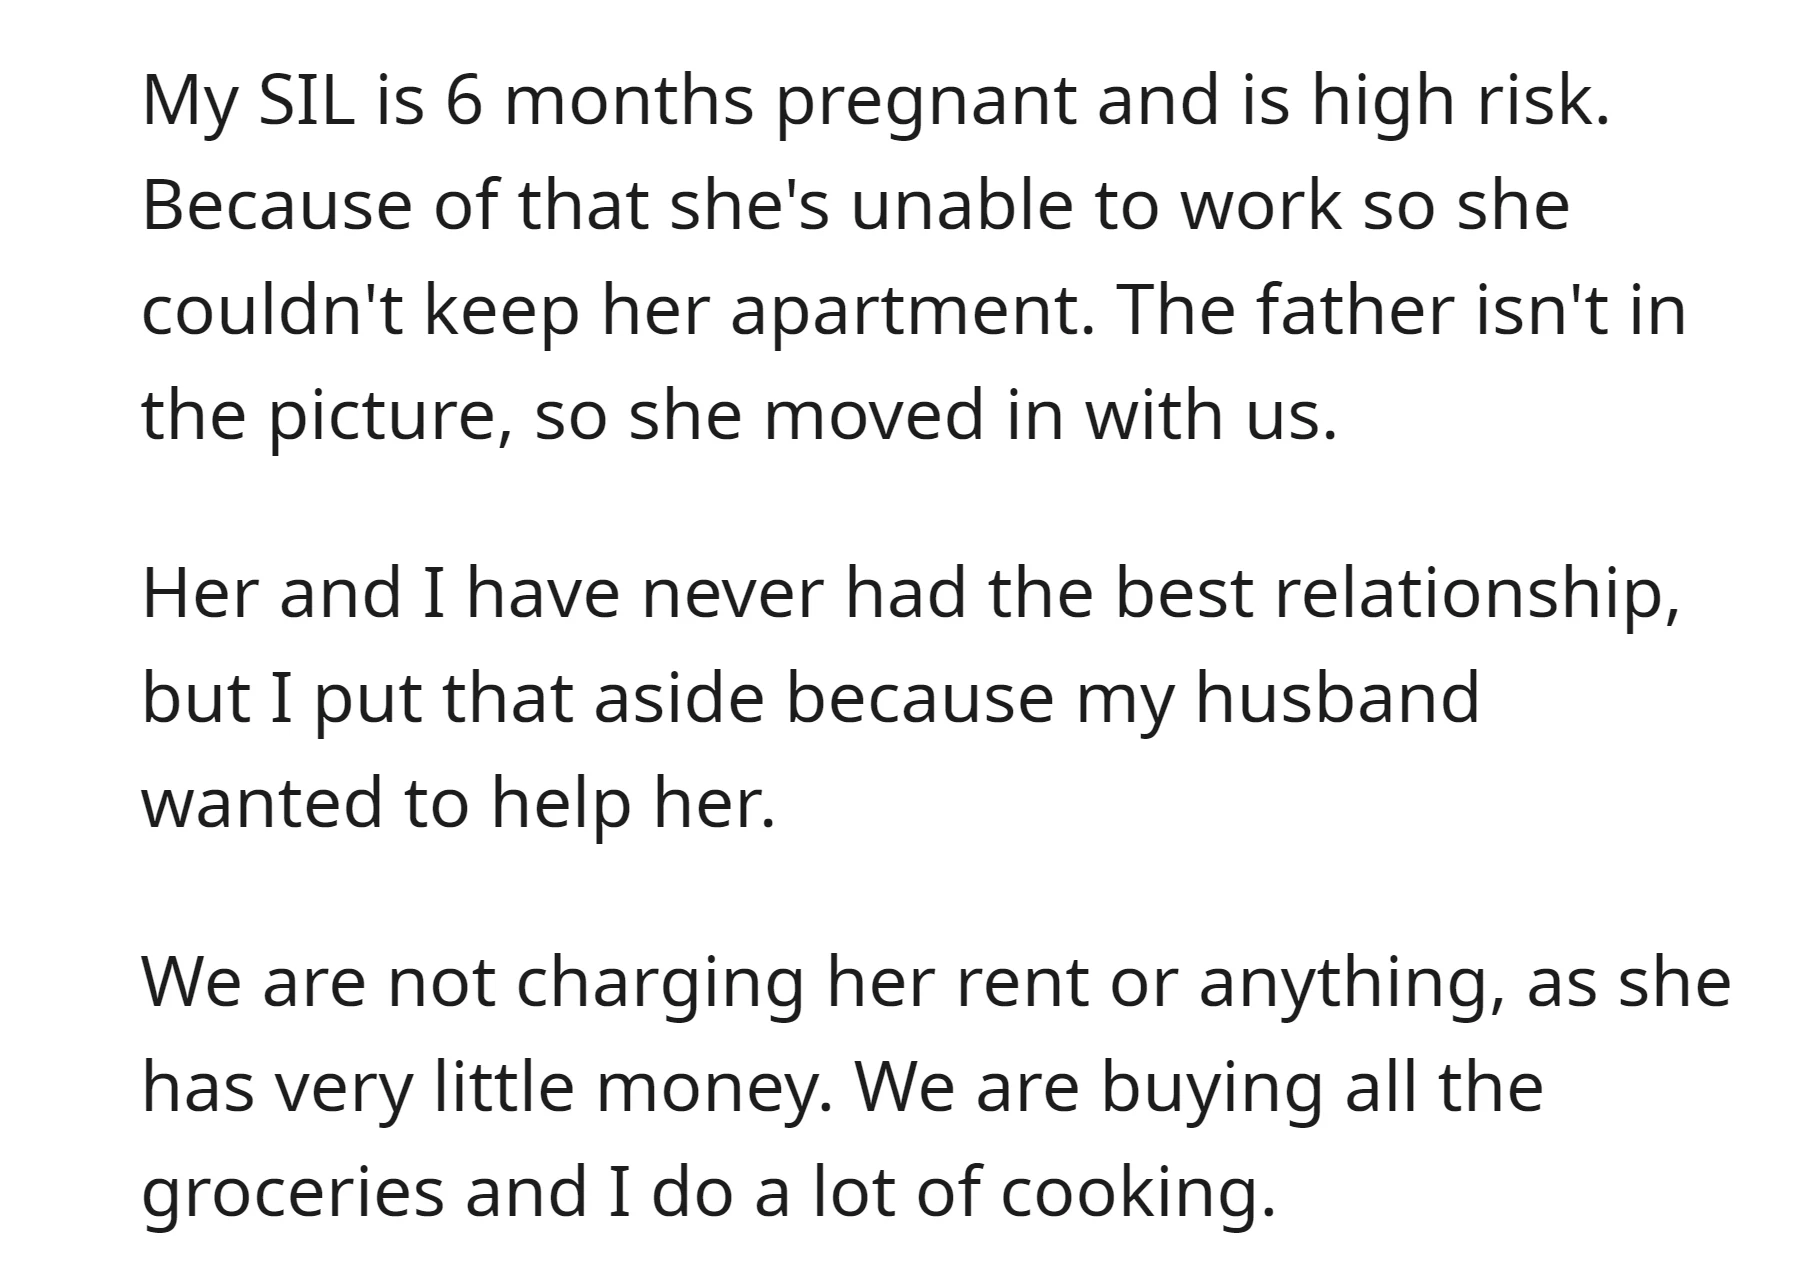 OP is providing support to their pregnant sister-in-law, who is high-risk and unable to work